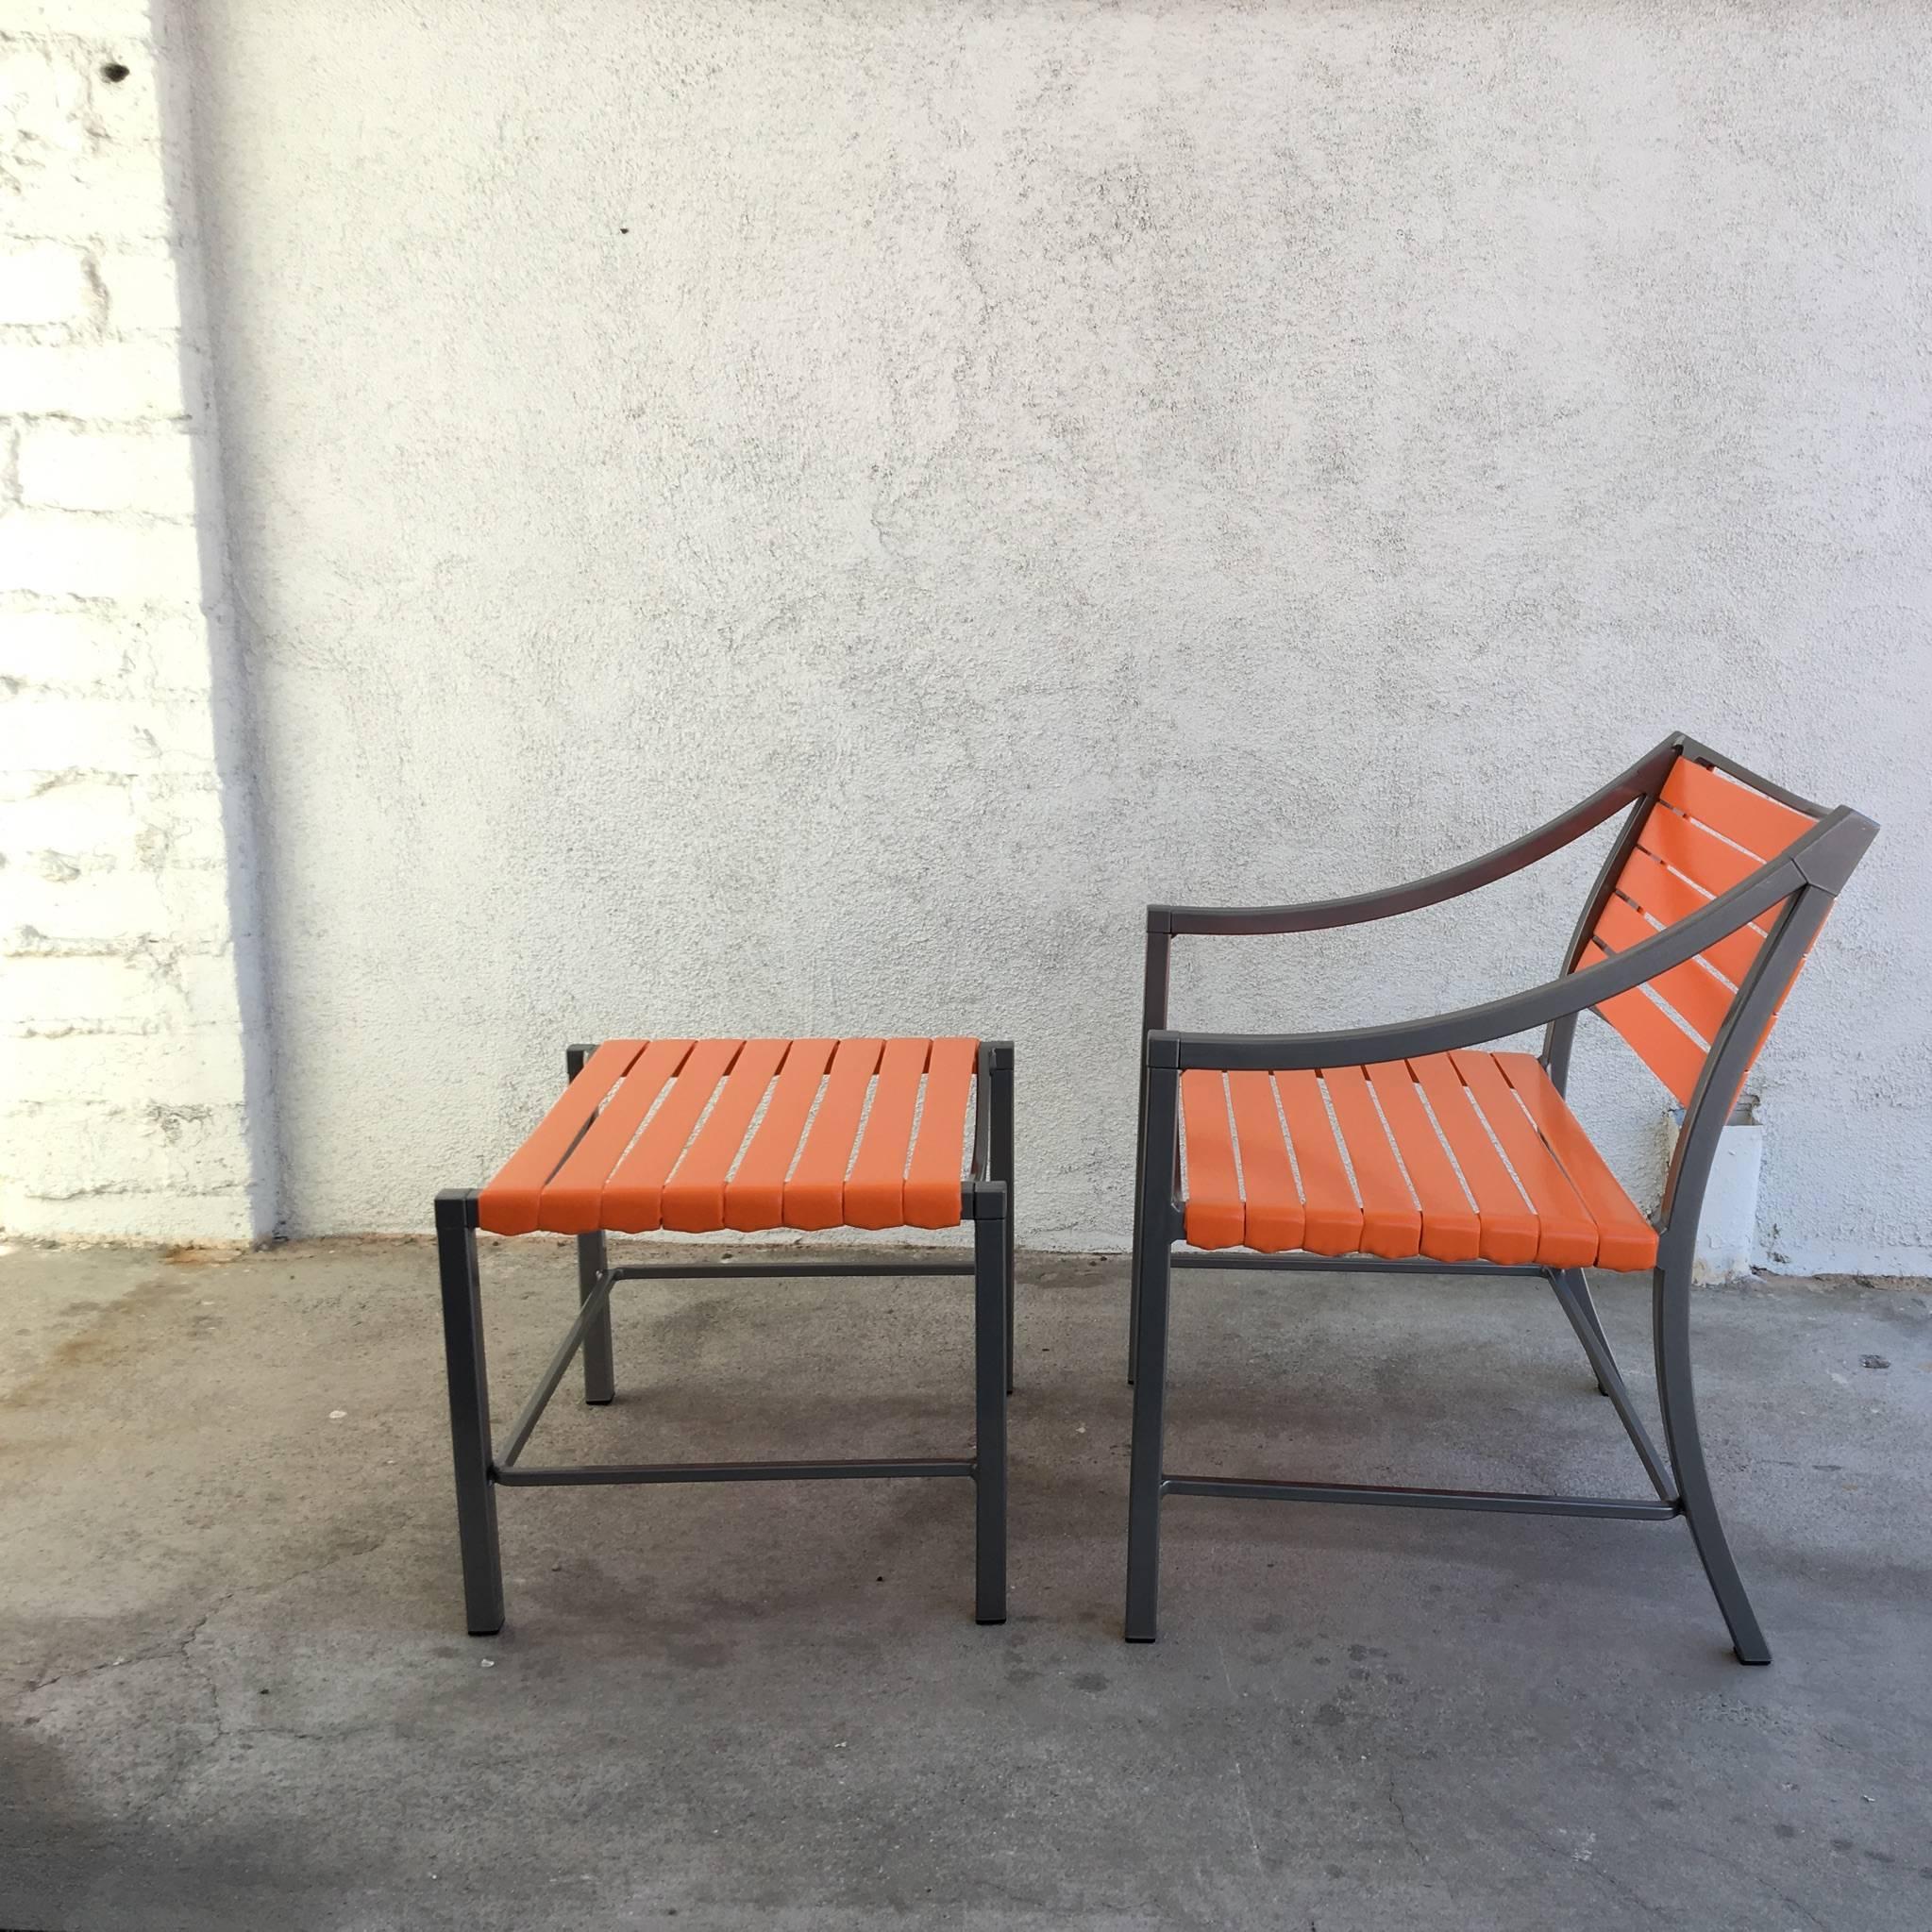 A amazing 1970s pair of outdoor chairs and Ottomans by Brown Jordan.
Newly professionally restored in a charcoal grey and tangerine orange straps.
Dimensions:
Chair: 28.75